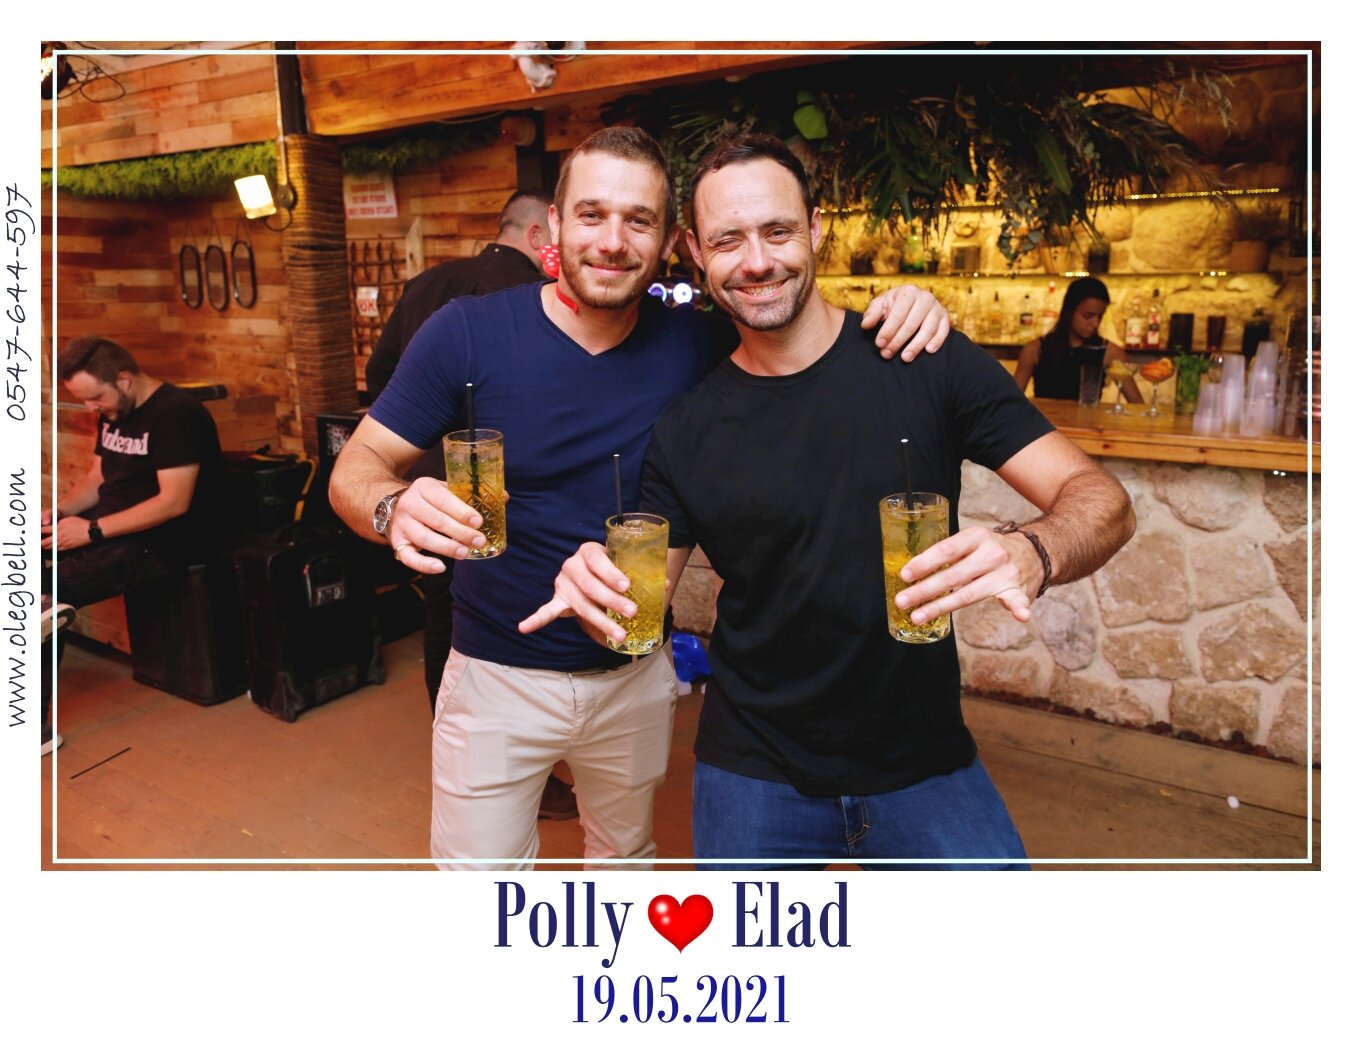 POLLY_AND_ELAD_WD_MG_SITE_037.JPG